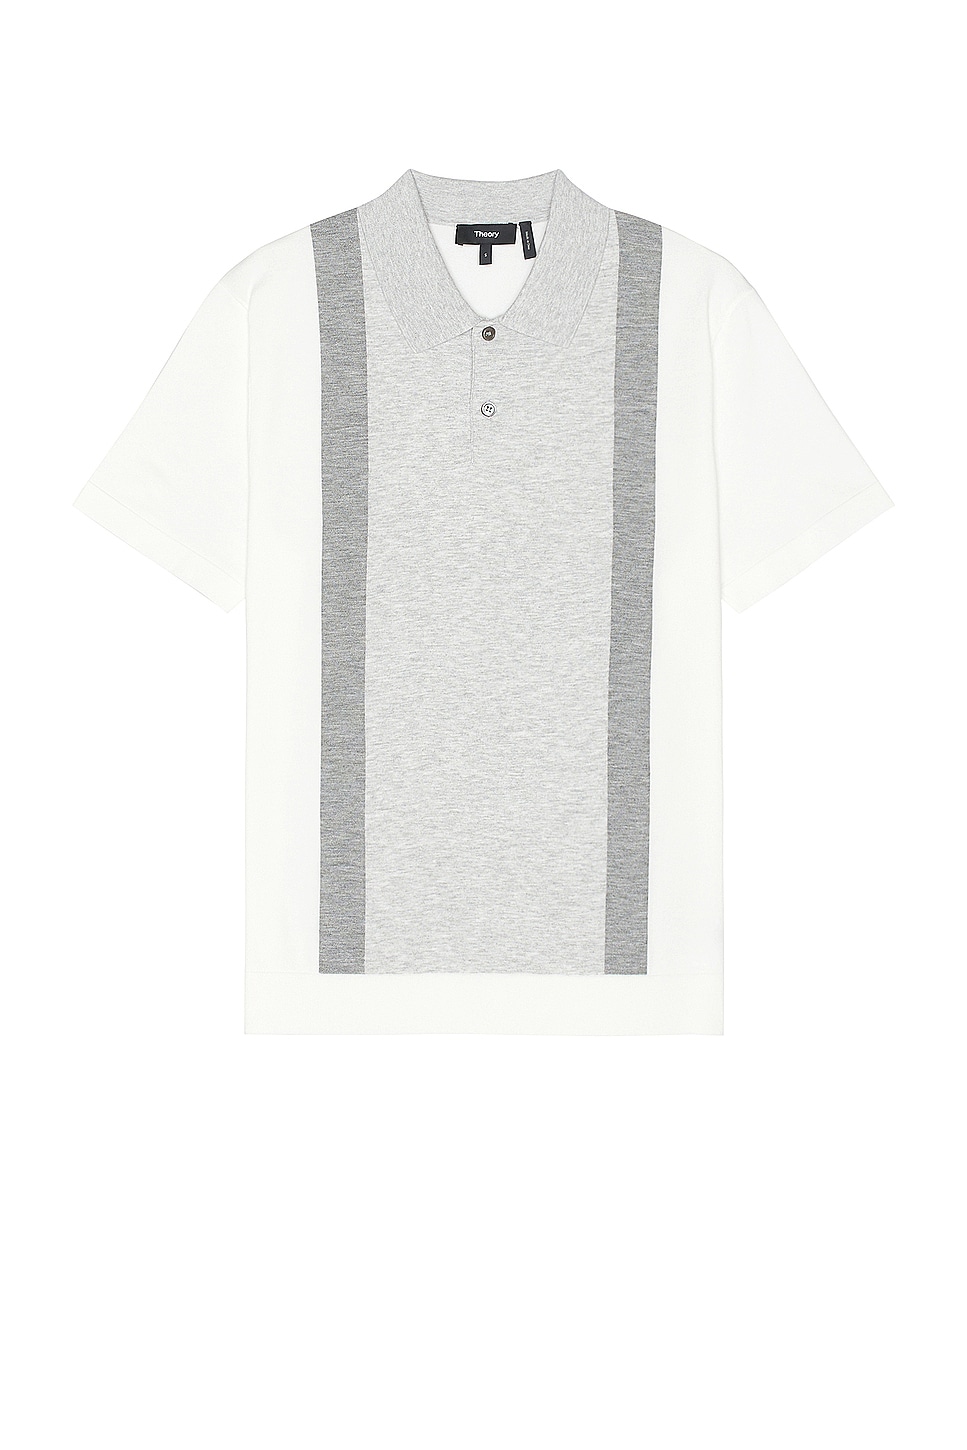 Image 1 of Theory Intarsia Sweater Polo in White Multi